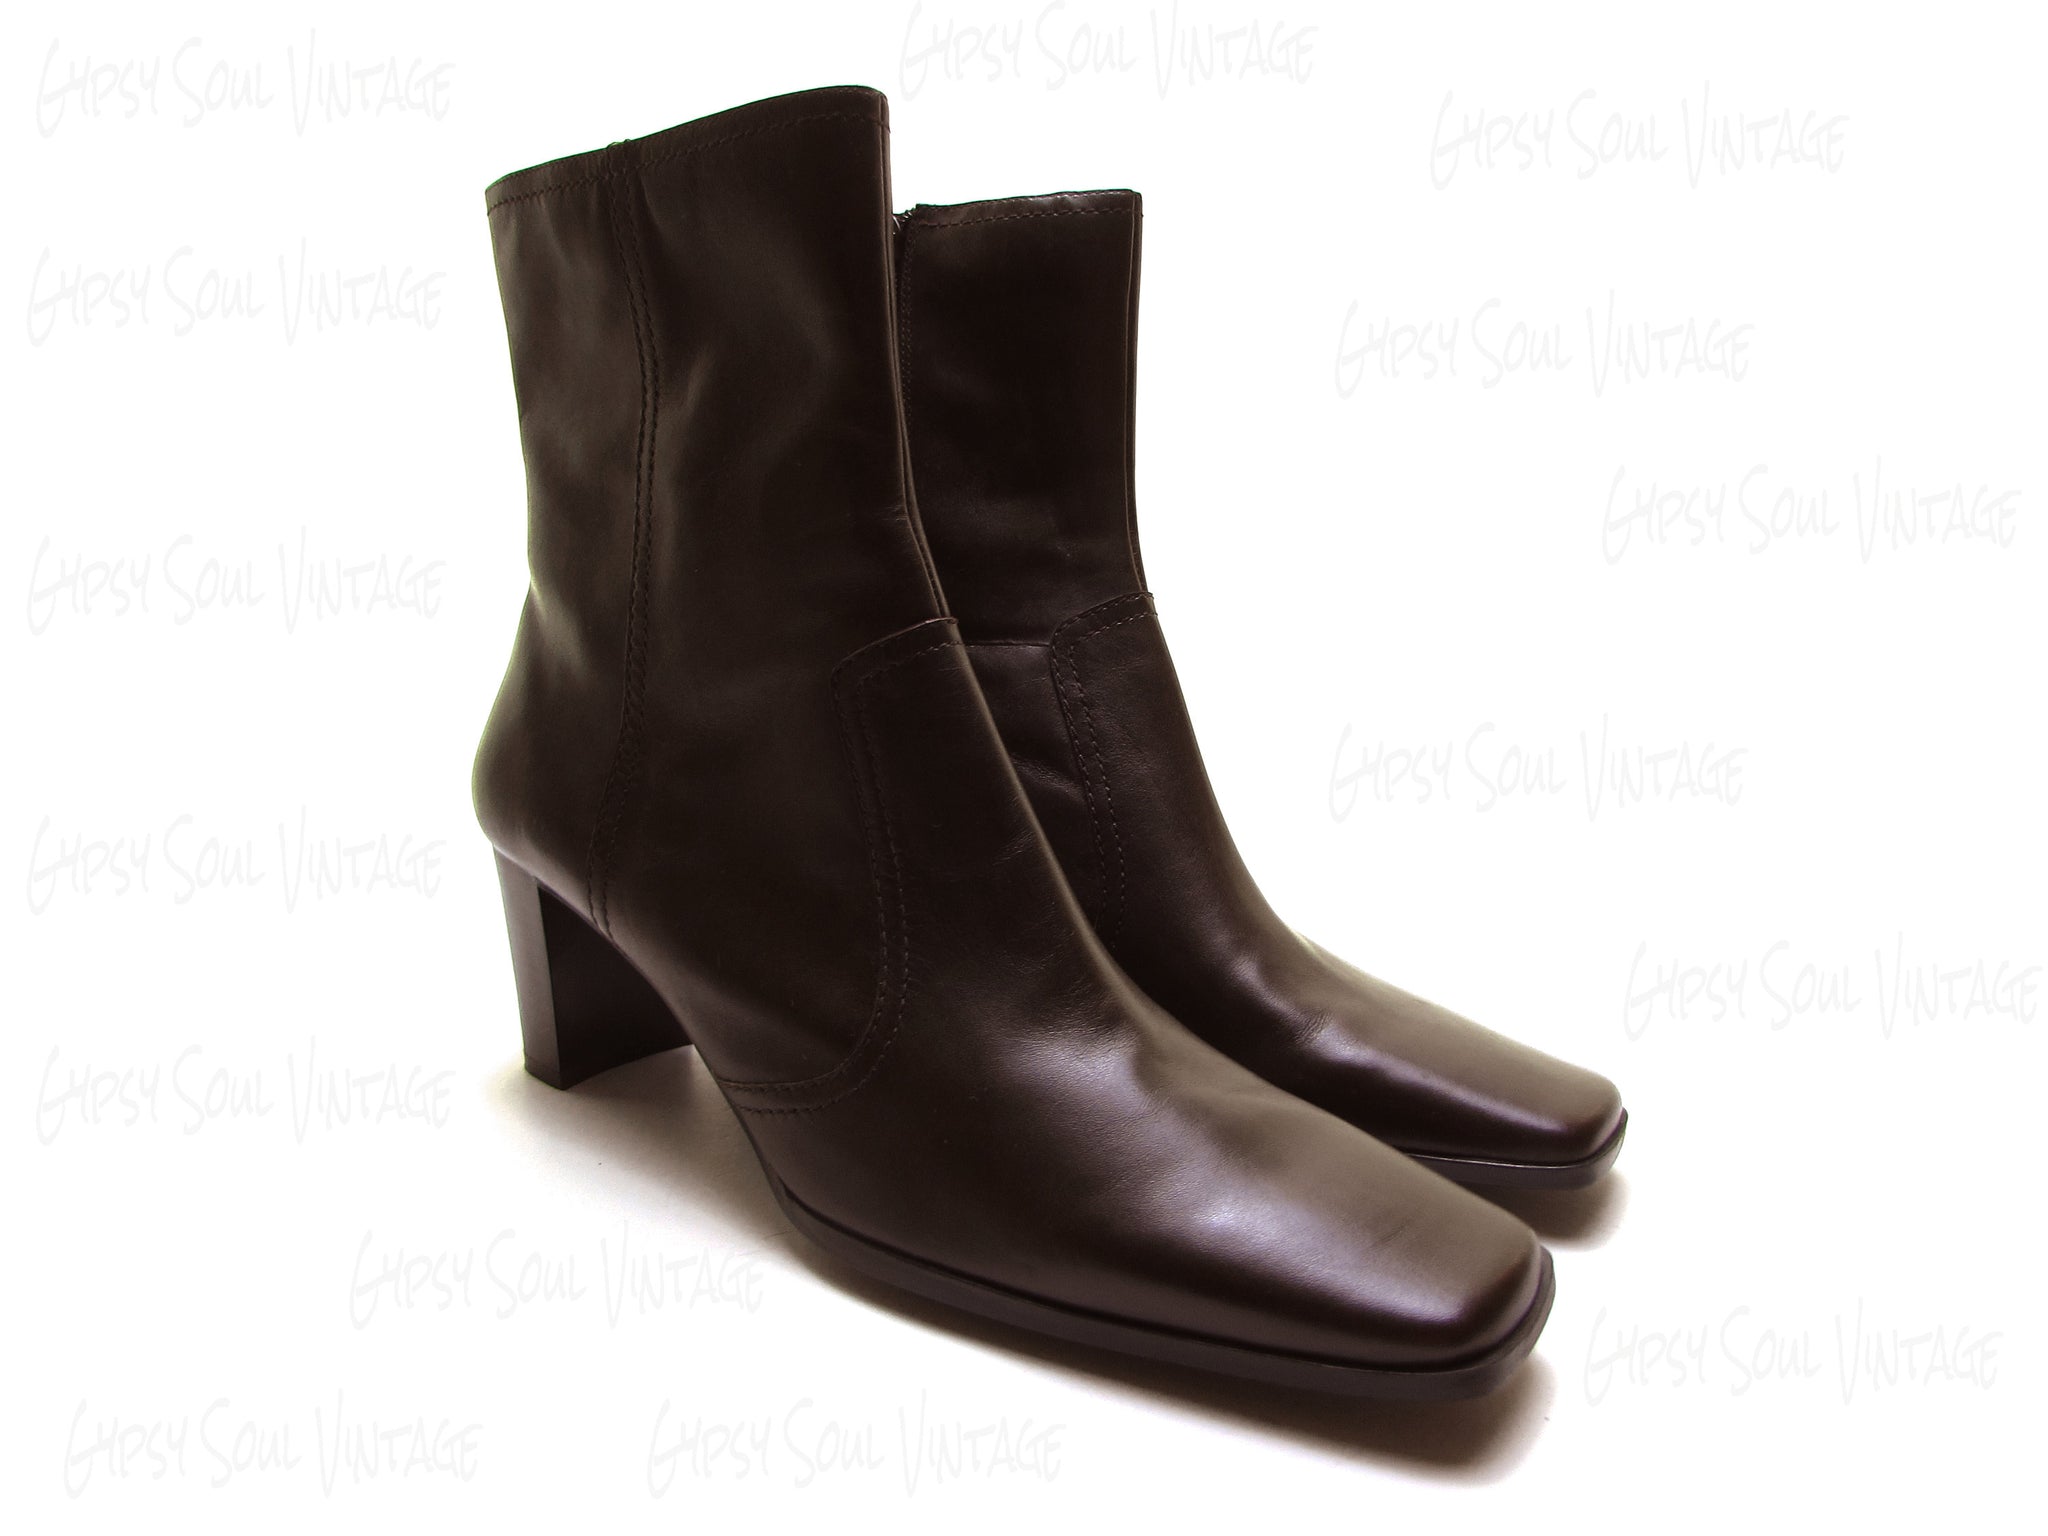 Vintage boots. Brown leather with a square toe.